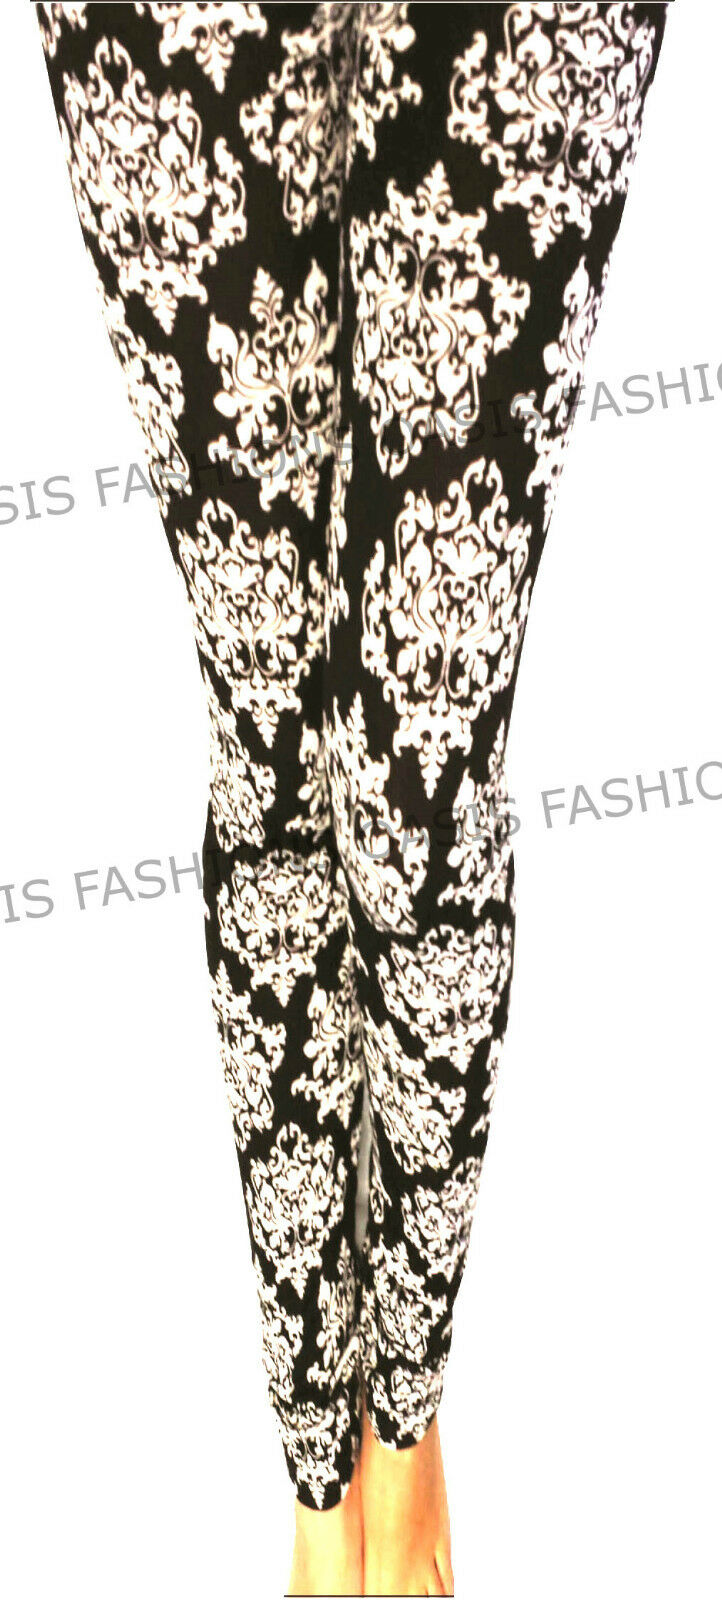 Ladies Black & Cream Damask Design Printed Leggings. Available In Sizes Small To Large (UK 8-14)